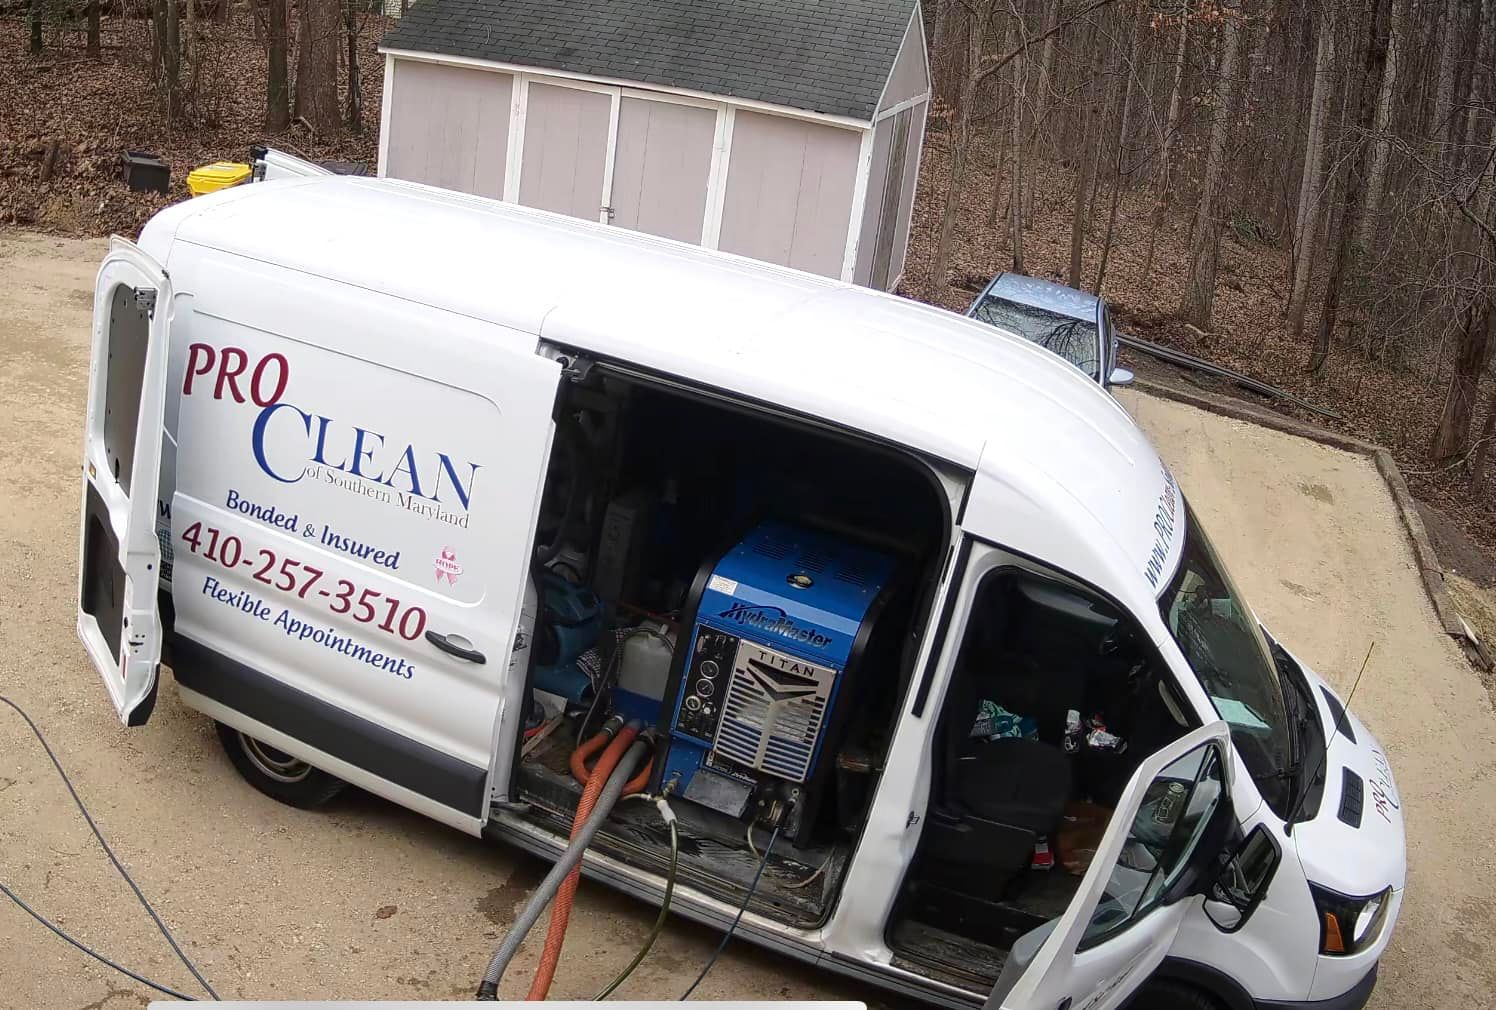 A white pro clean van is parked in a driveway.